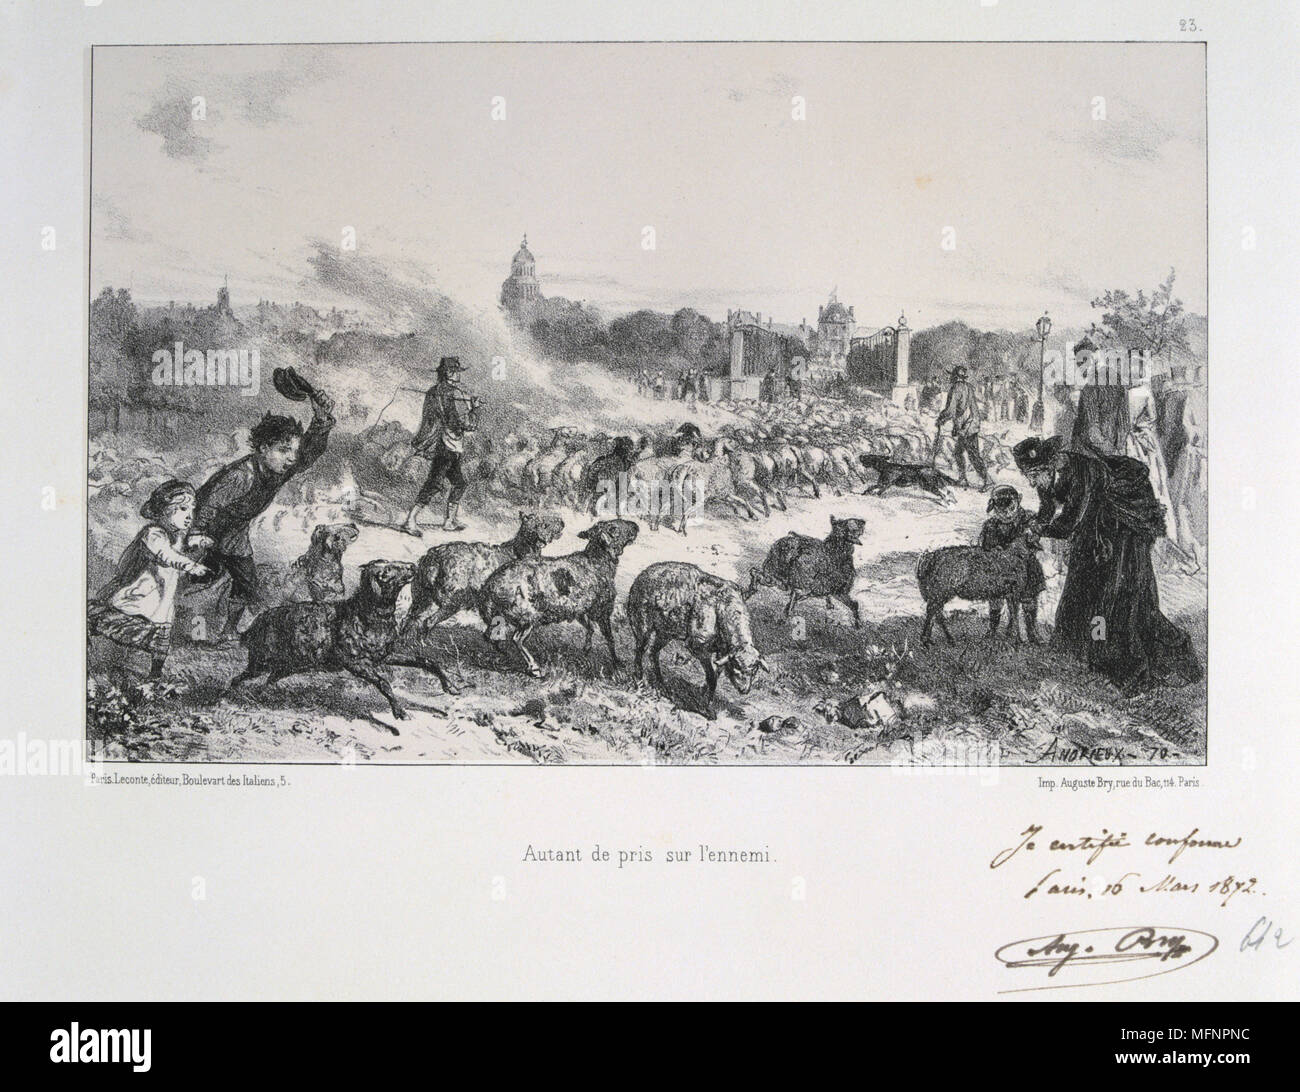 Franco-Prussian War 1870-1871: Driving away a flock of sheep to deny them falling into the hands of the Prussians.  From a series of lithographs  by Clement August Andrieux on the Gardes Nationales. Stock Photo